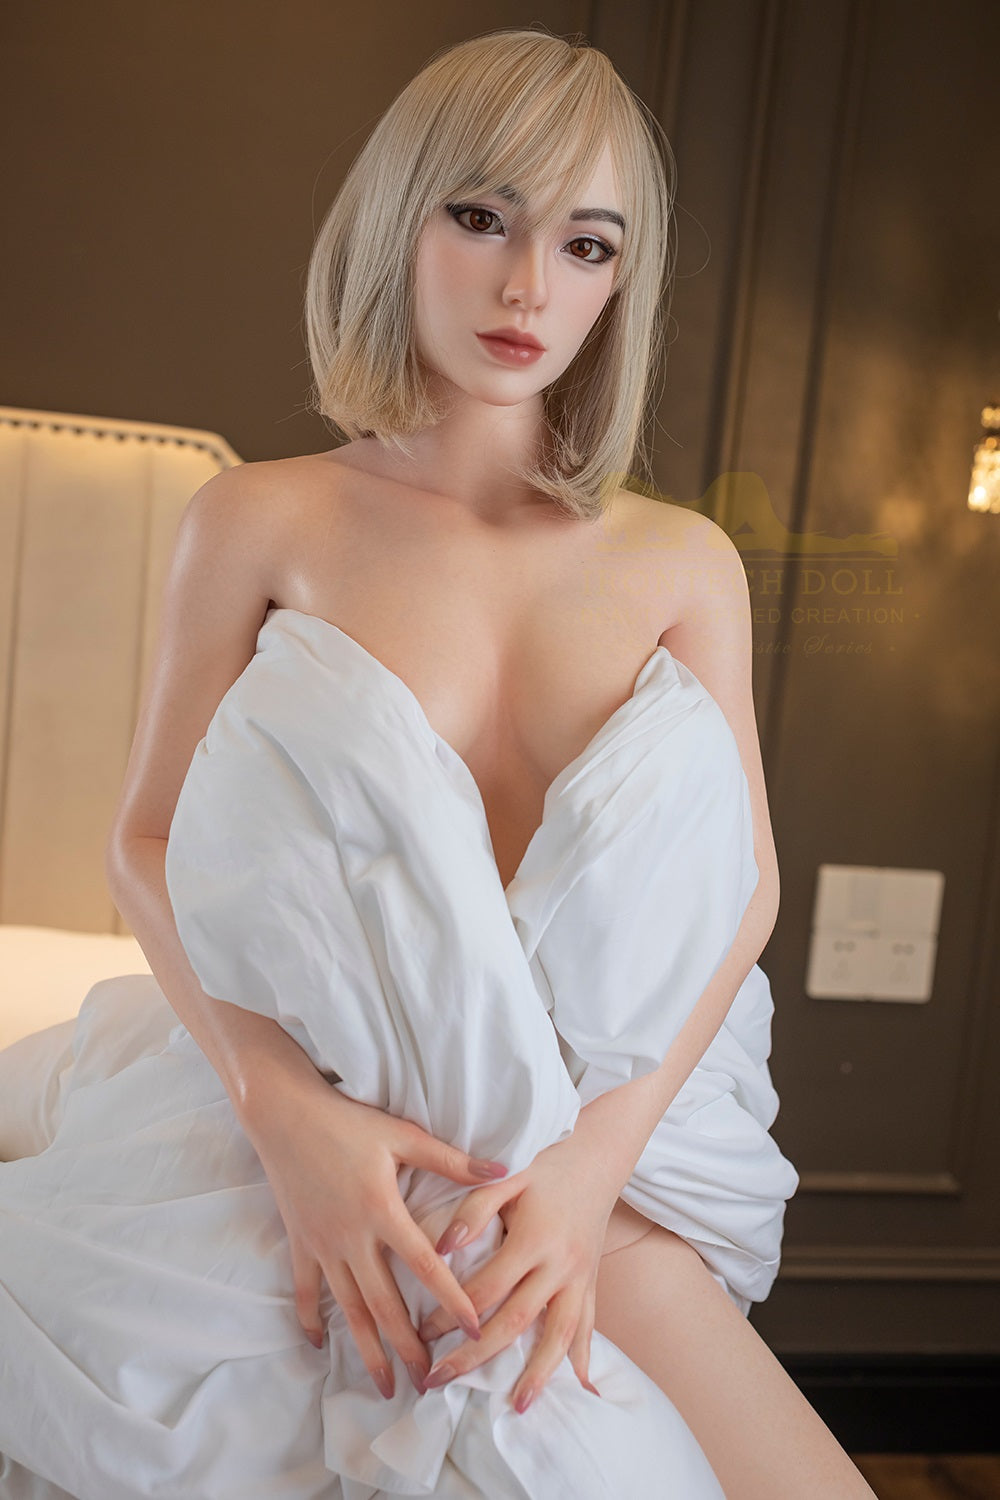 Irontechdoll Brandi 167cm S47 Full Silicone with Wig Realistic Sex Doll Natural Skin Adult Love Doll